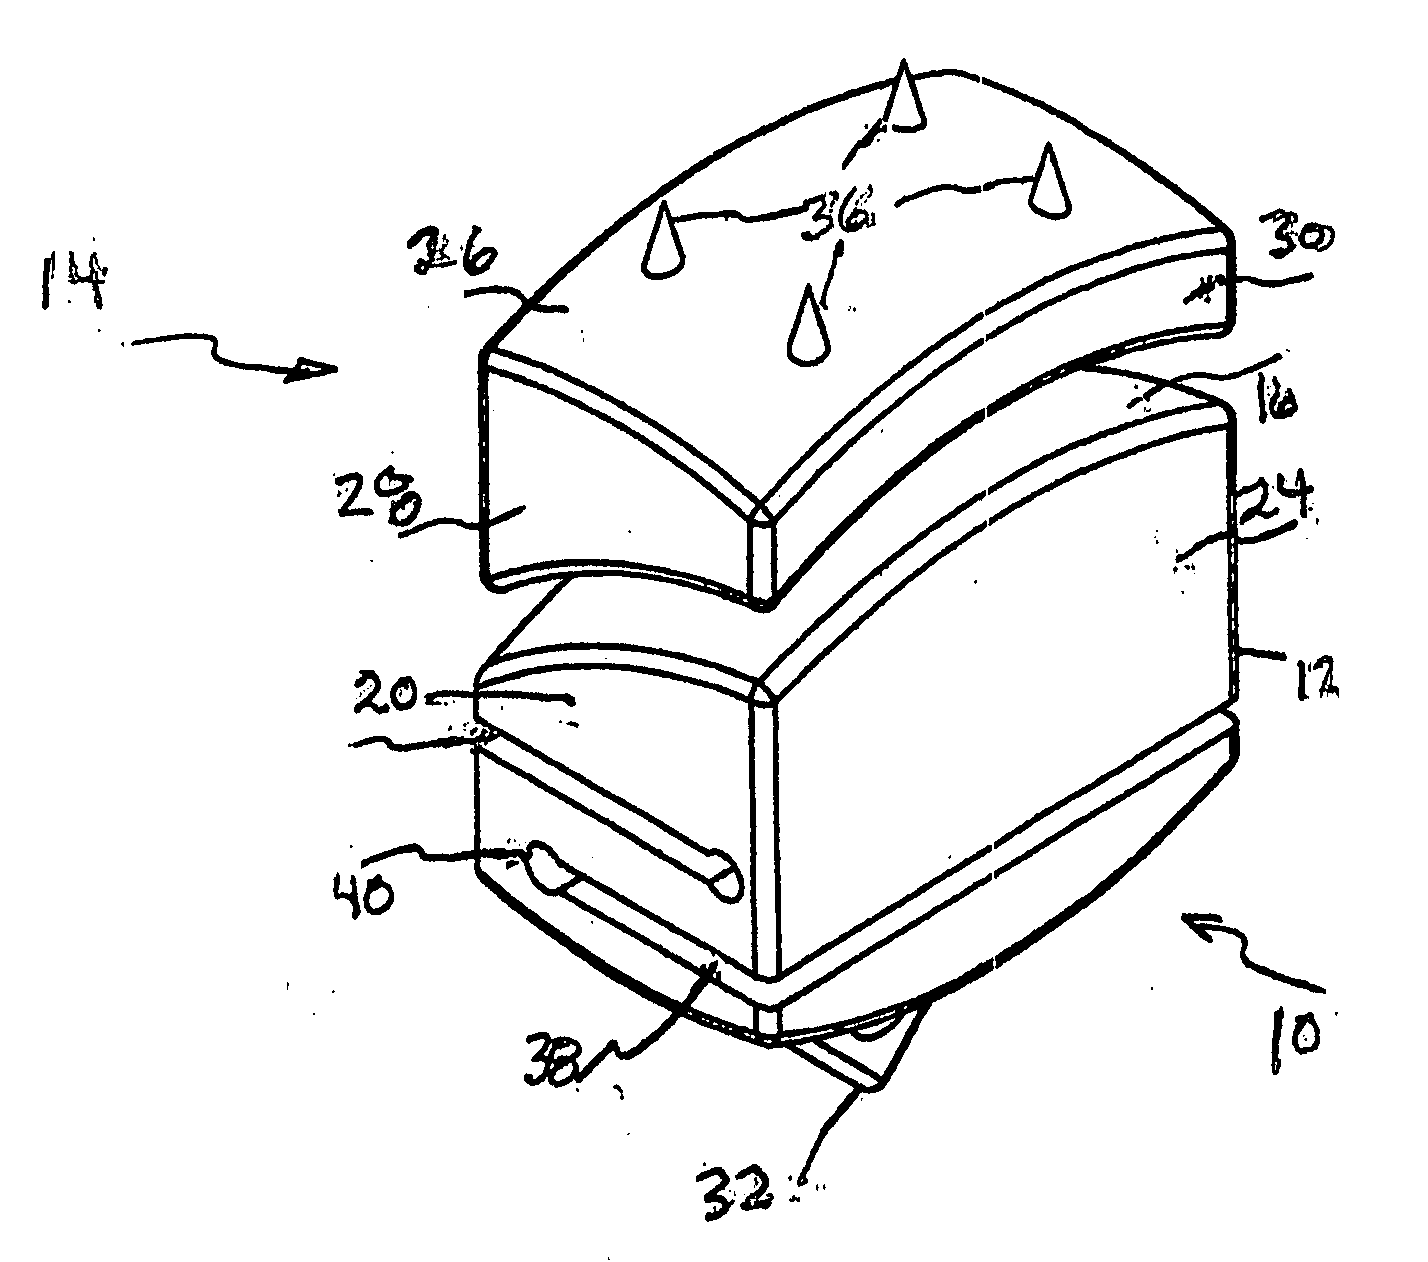 Posterior metal-on-metal disc replacement device and method